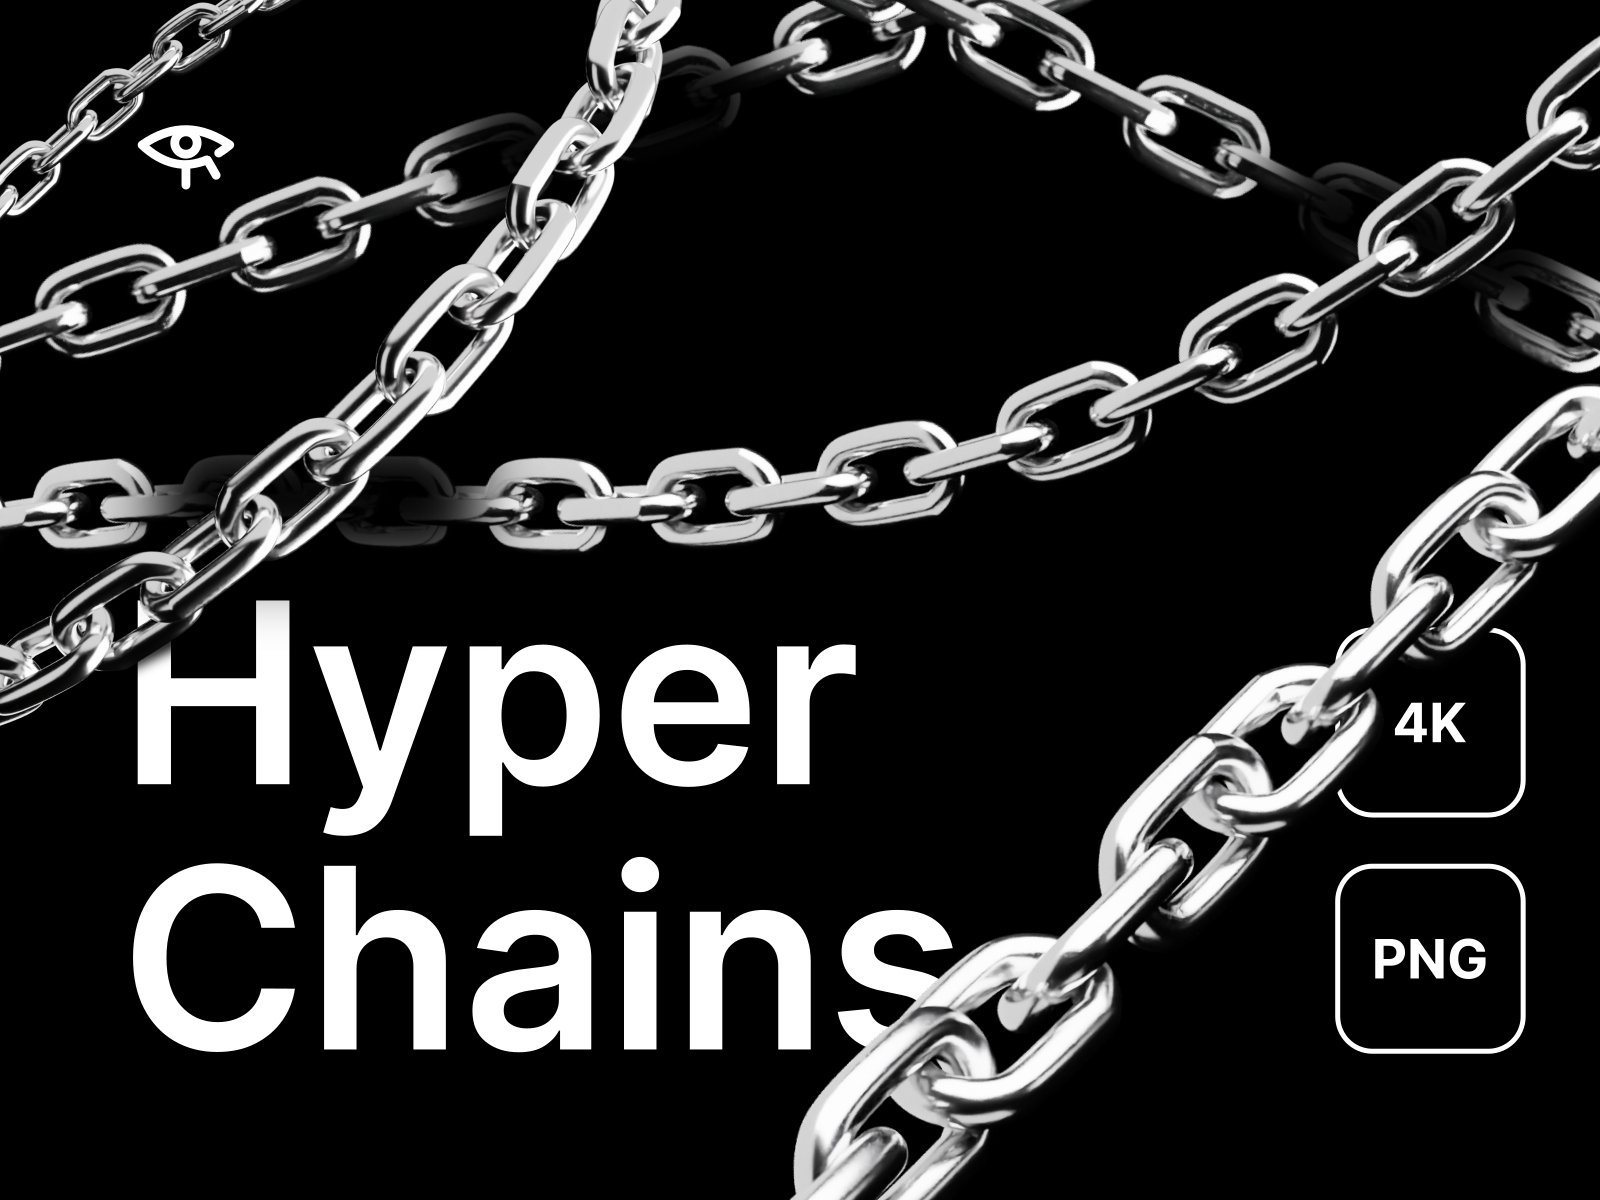 Hyper Chains Textures cover image.